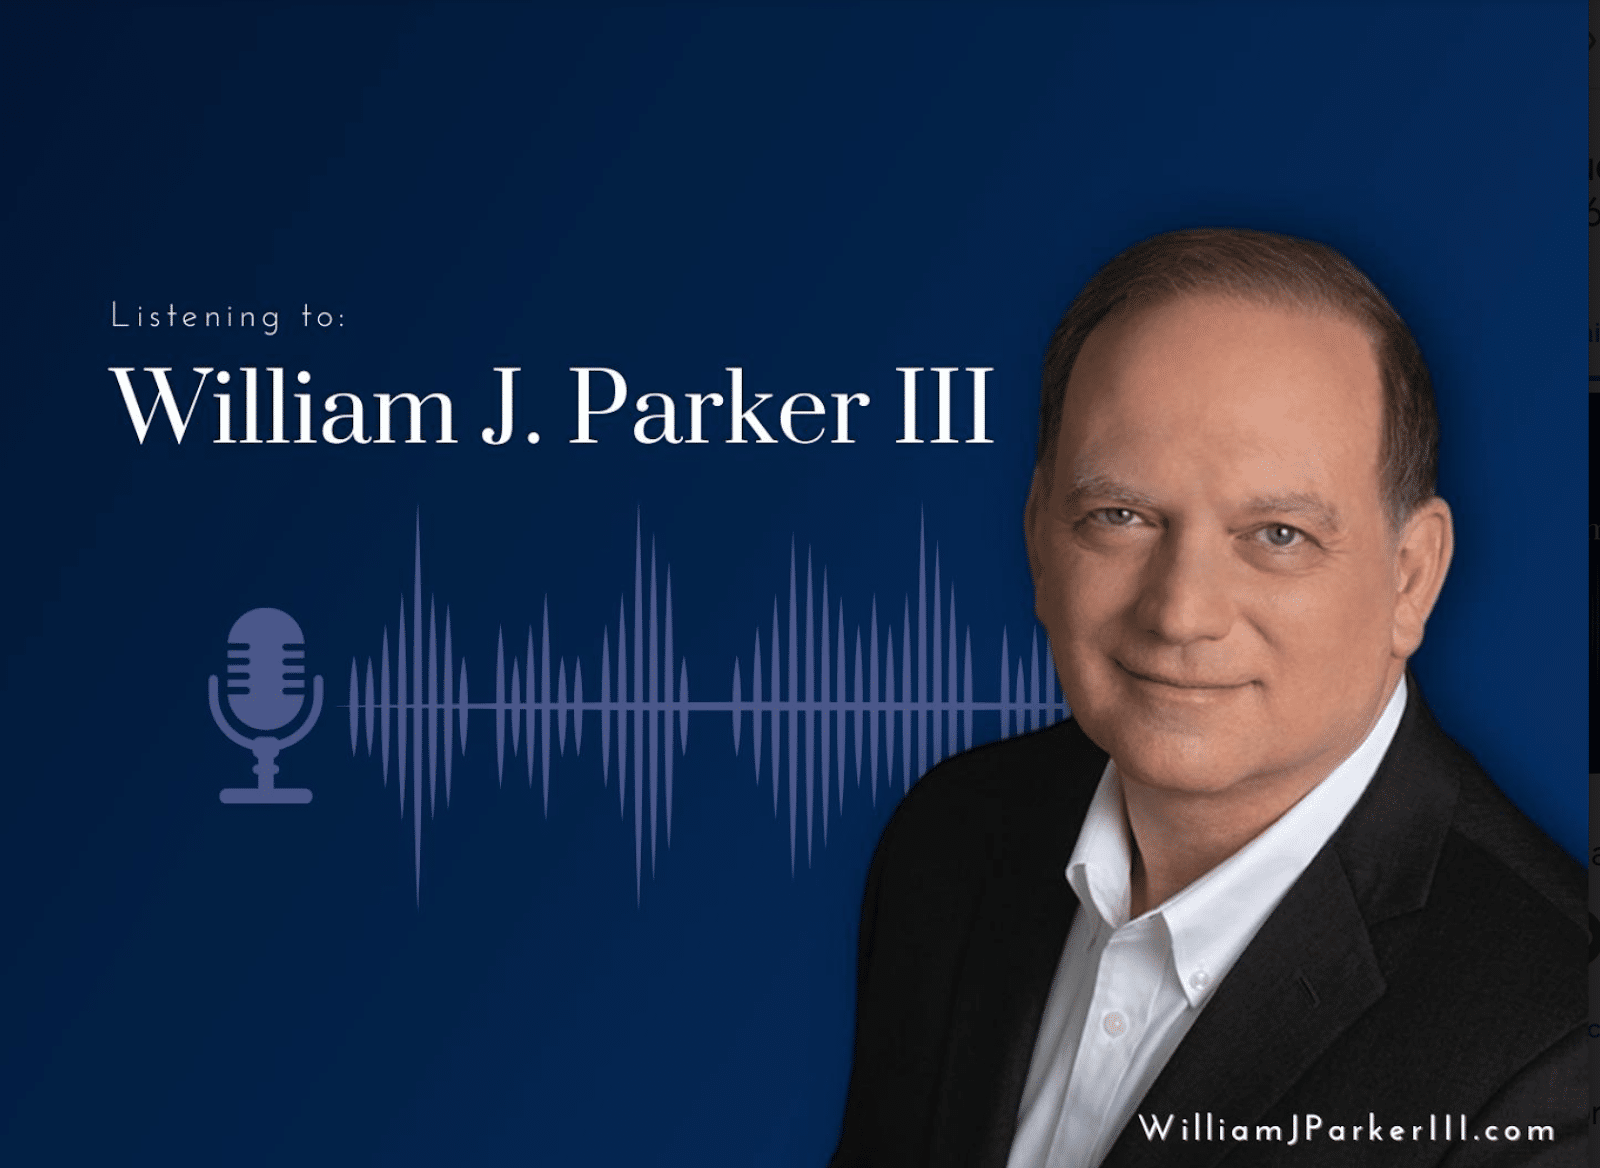 Bill Parkers National Security Show Episode 2 Irene Finel Honigman